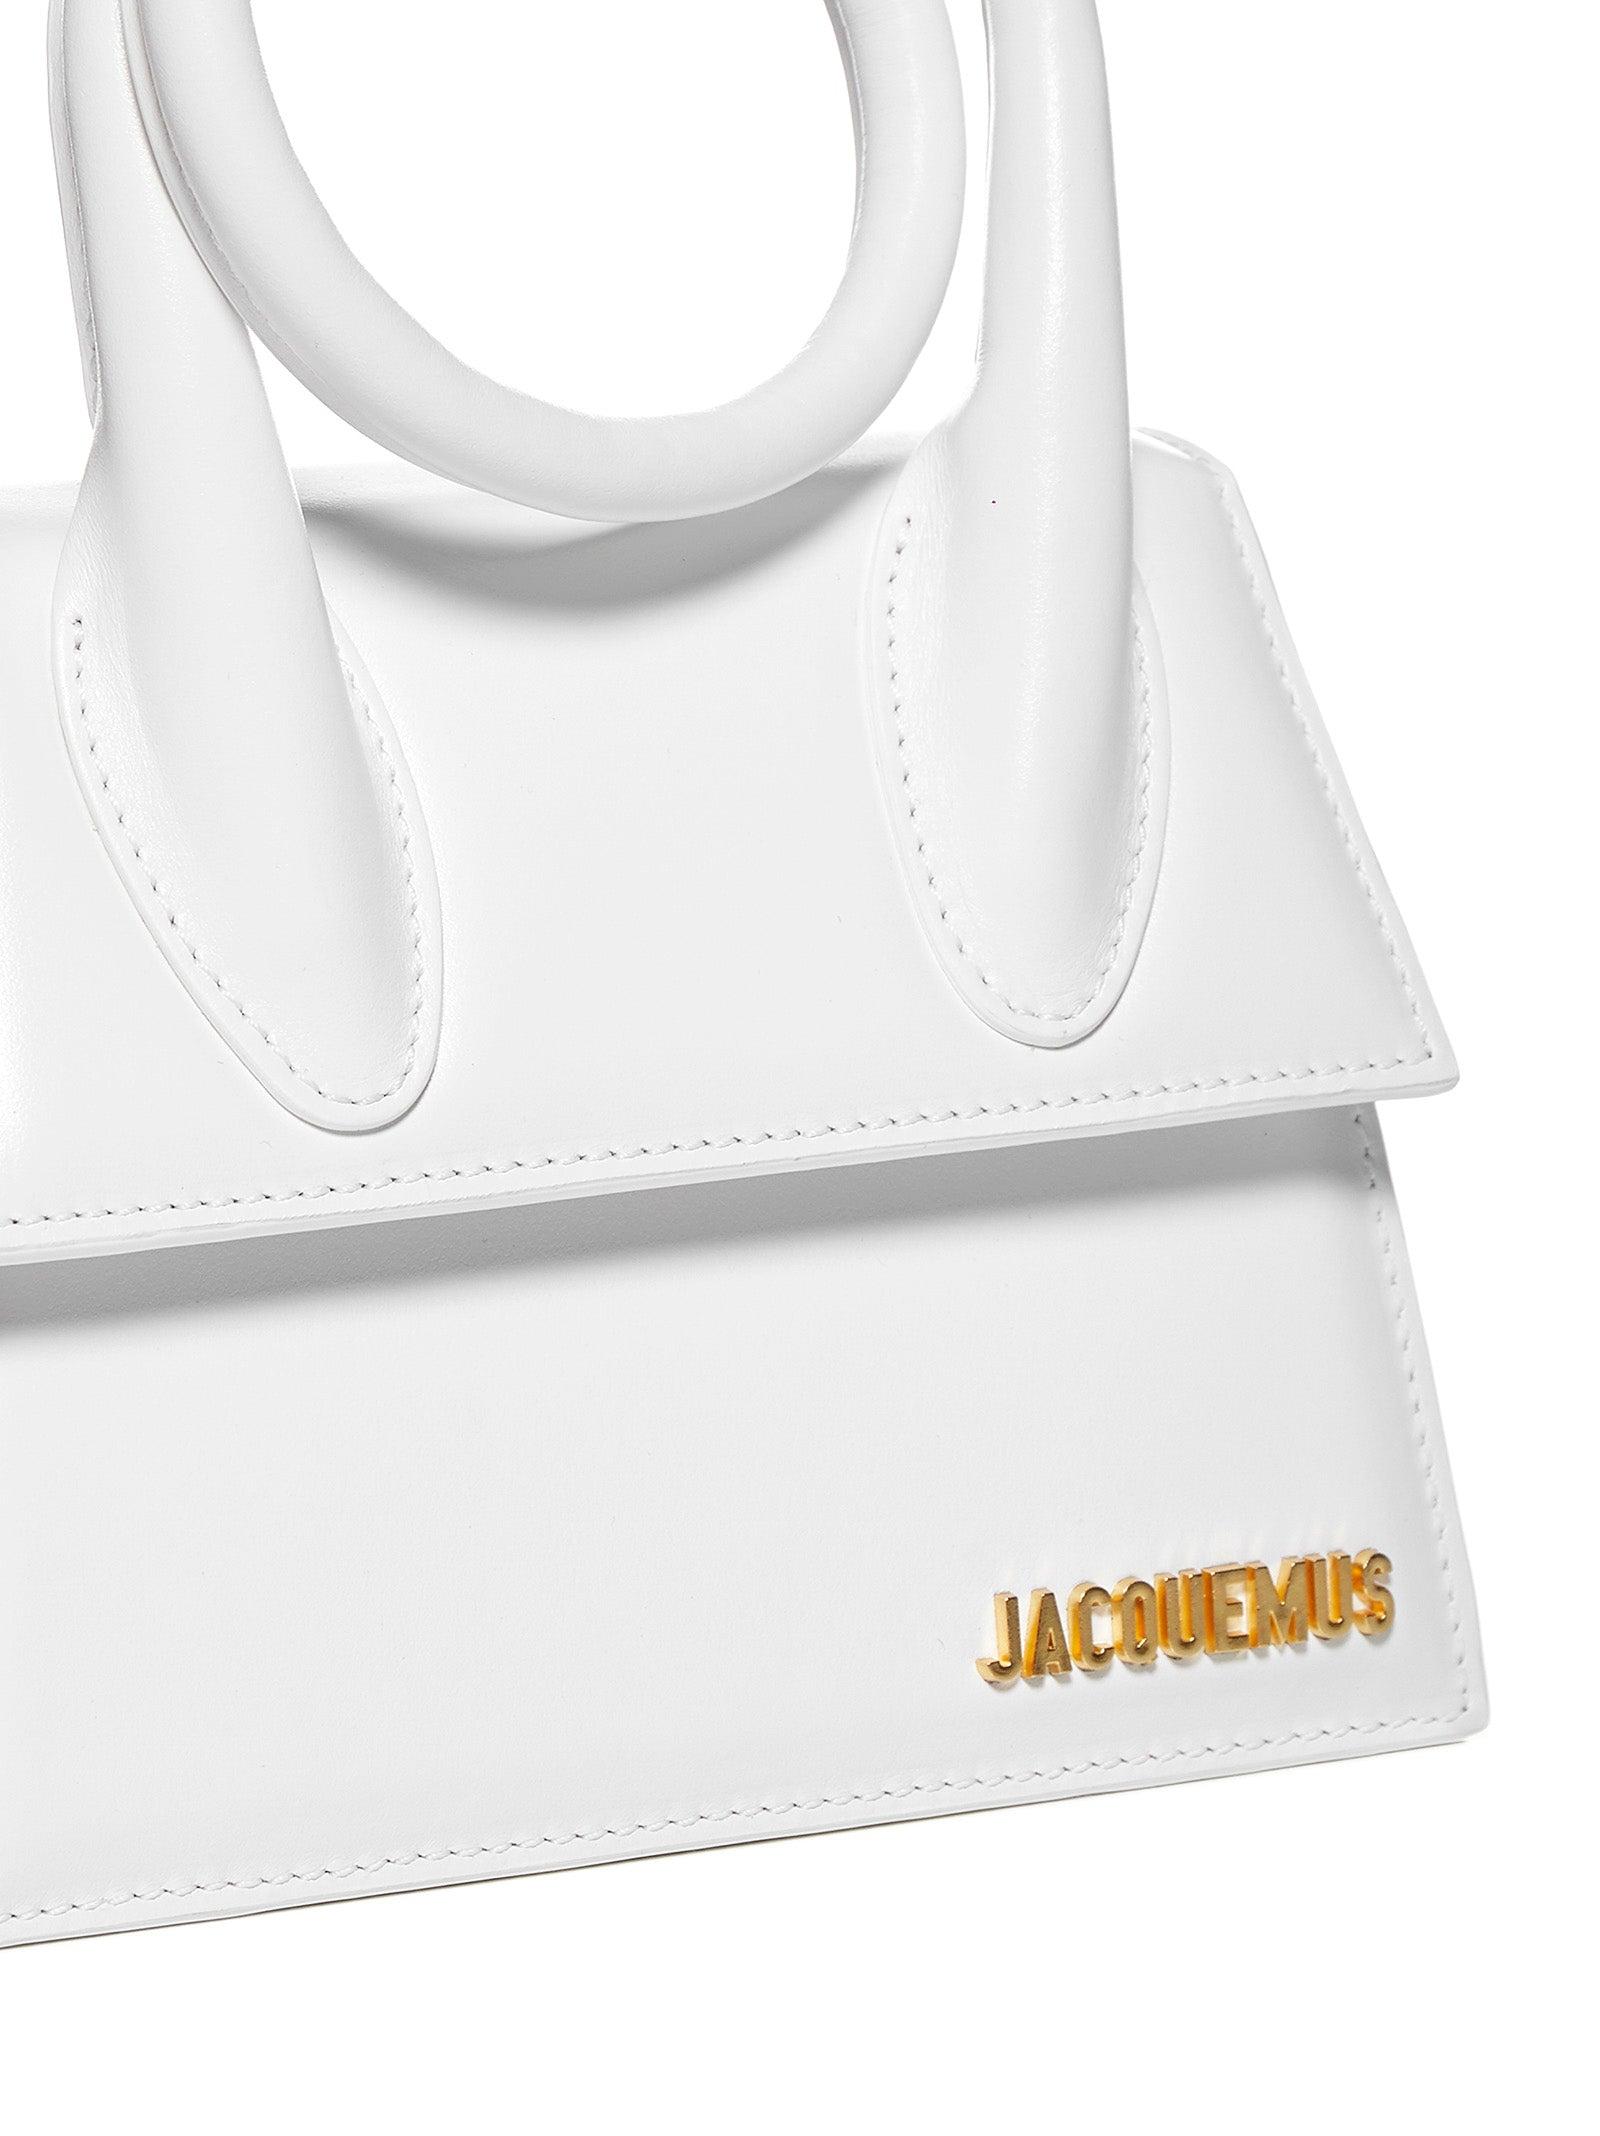 Jacquemus Leather Le Chiquito Noeud Shoulder Bag in White - Lyst